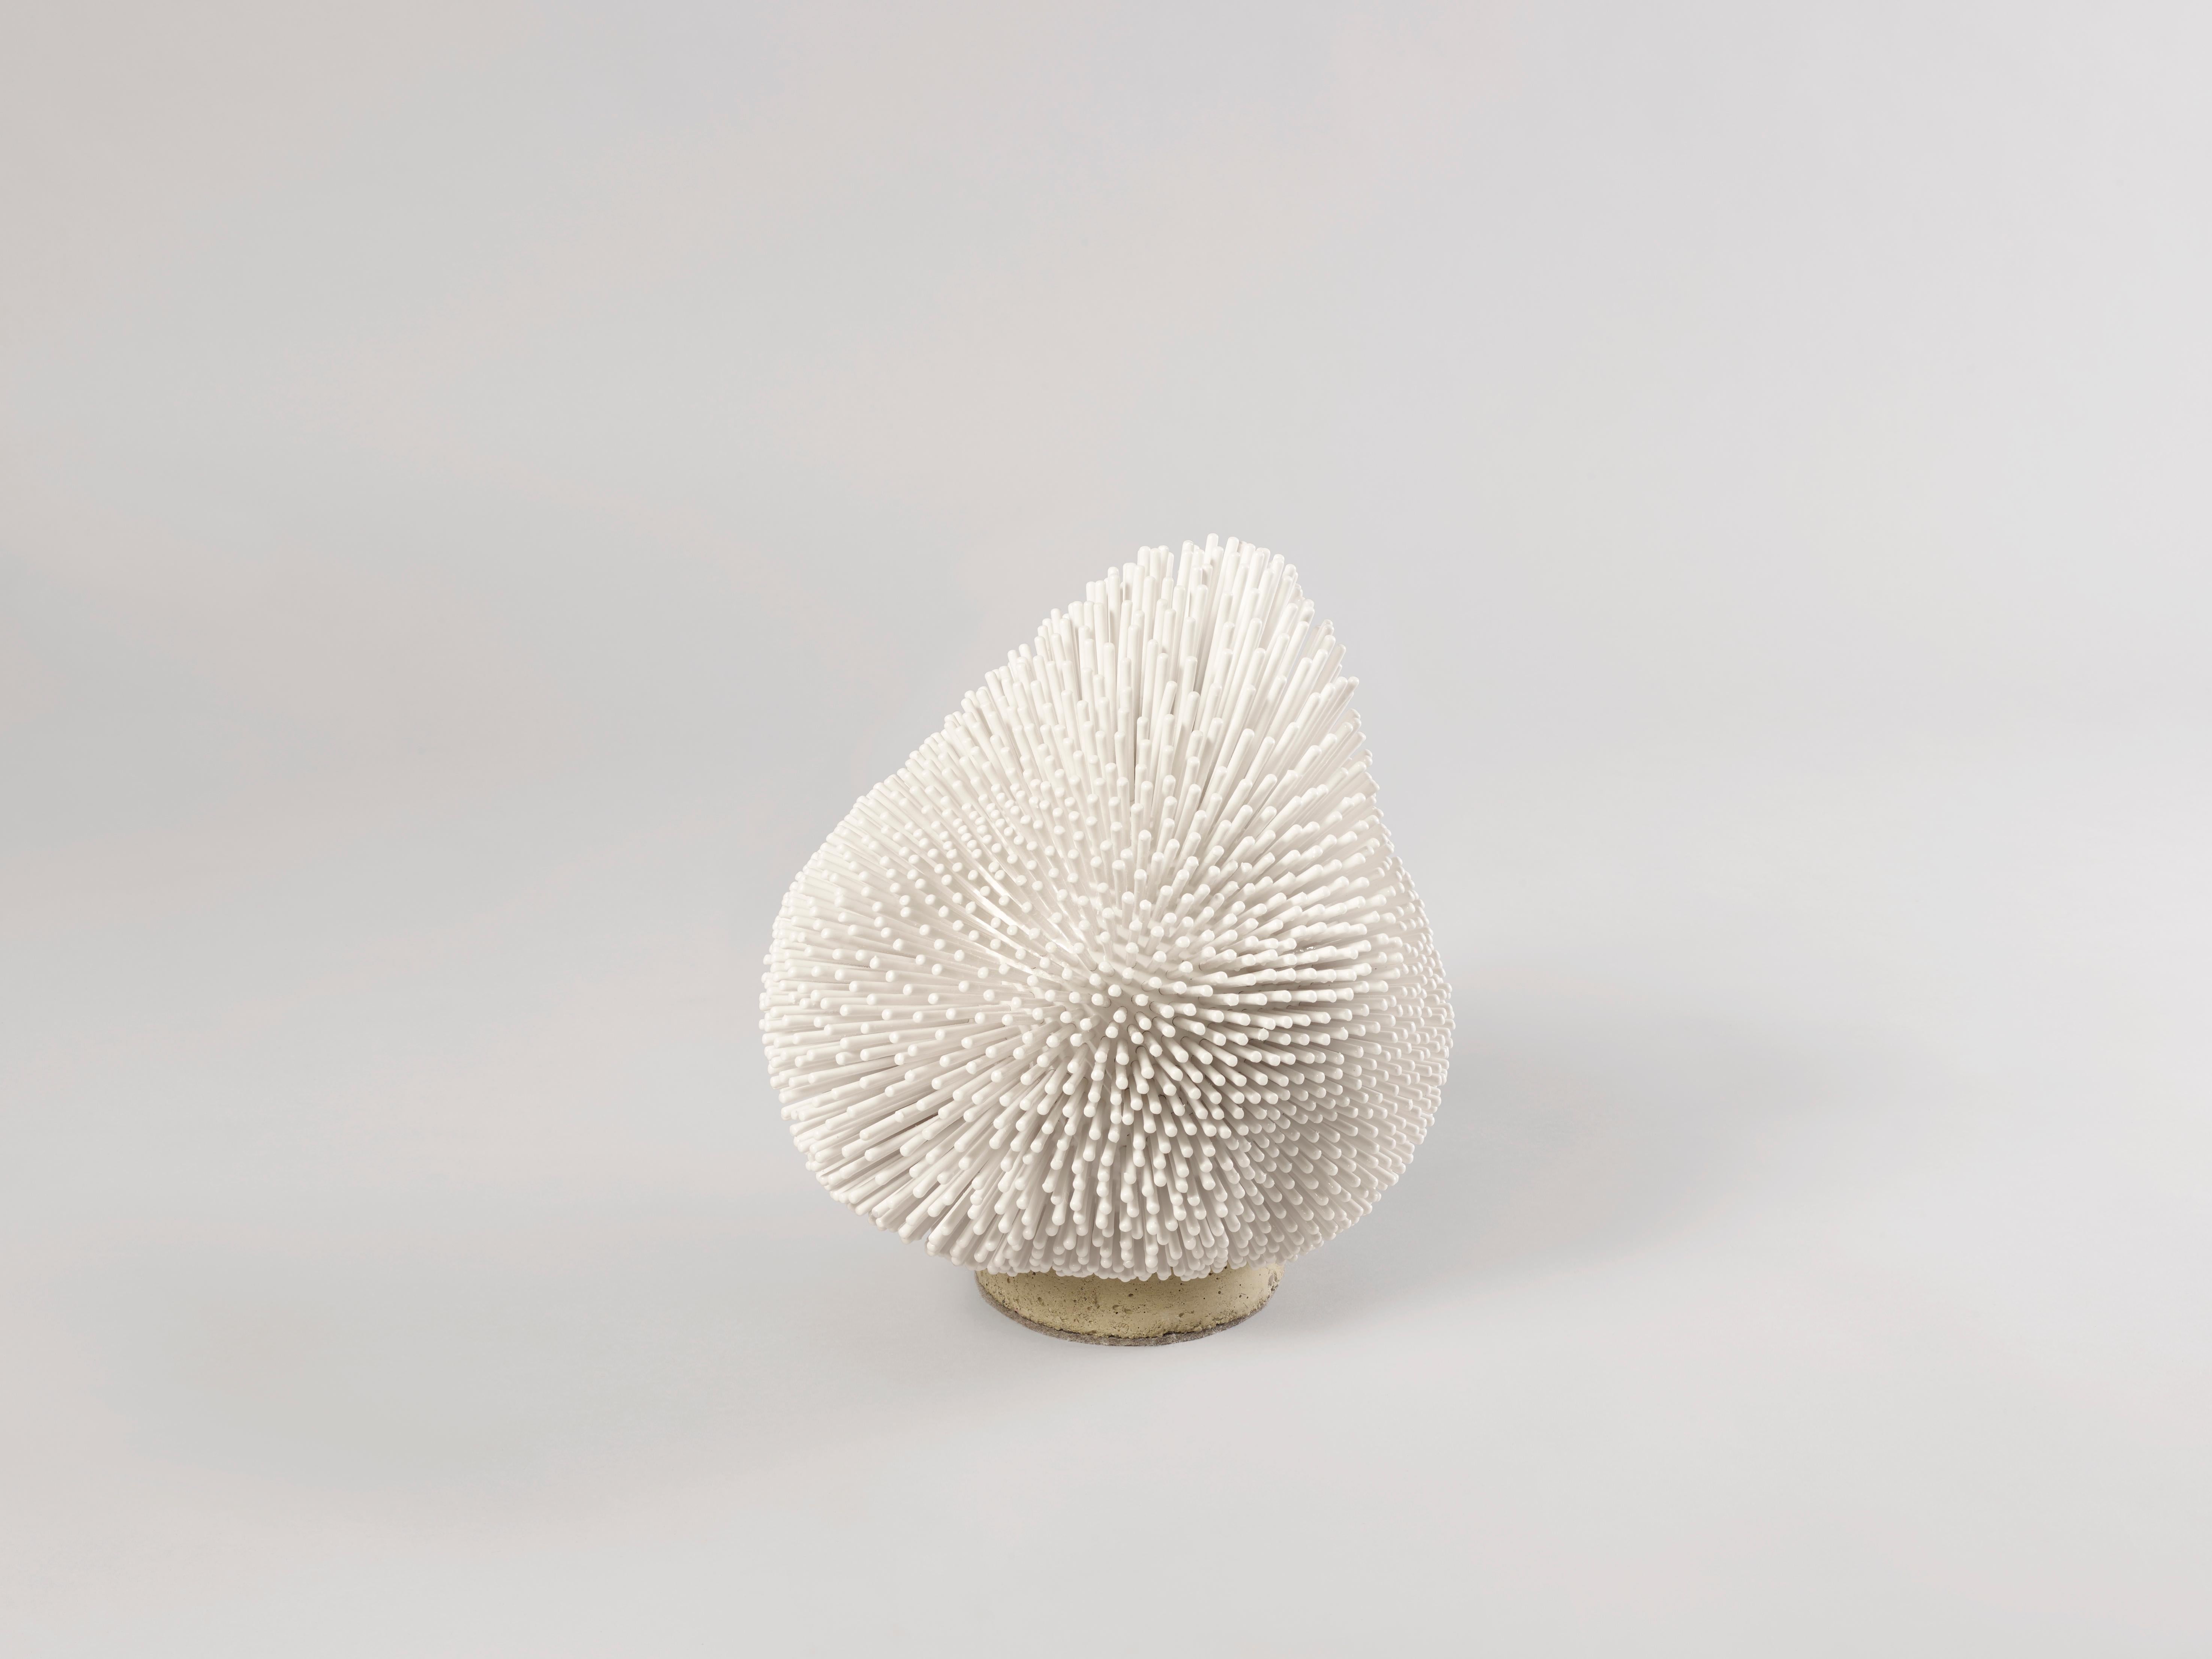 From simple beechwood rods, German artist Pia Maria Raeder creates refined functional sculptures reminiscent of biomorphic forms. She has become globally known for her ’Sea Anemone’ collection that reflects the beauty found on the ocean floor. Work